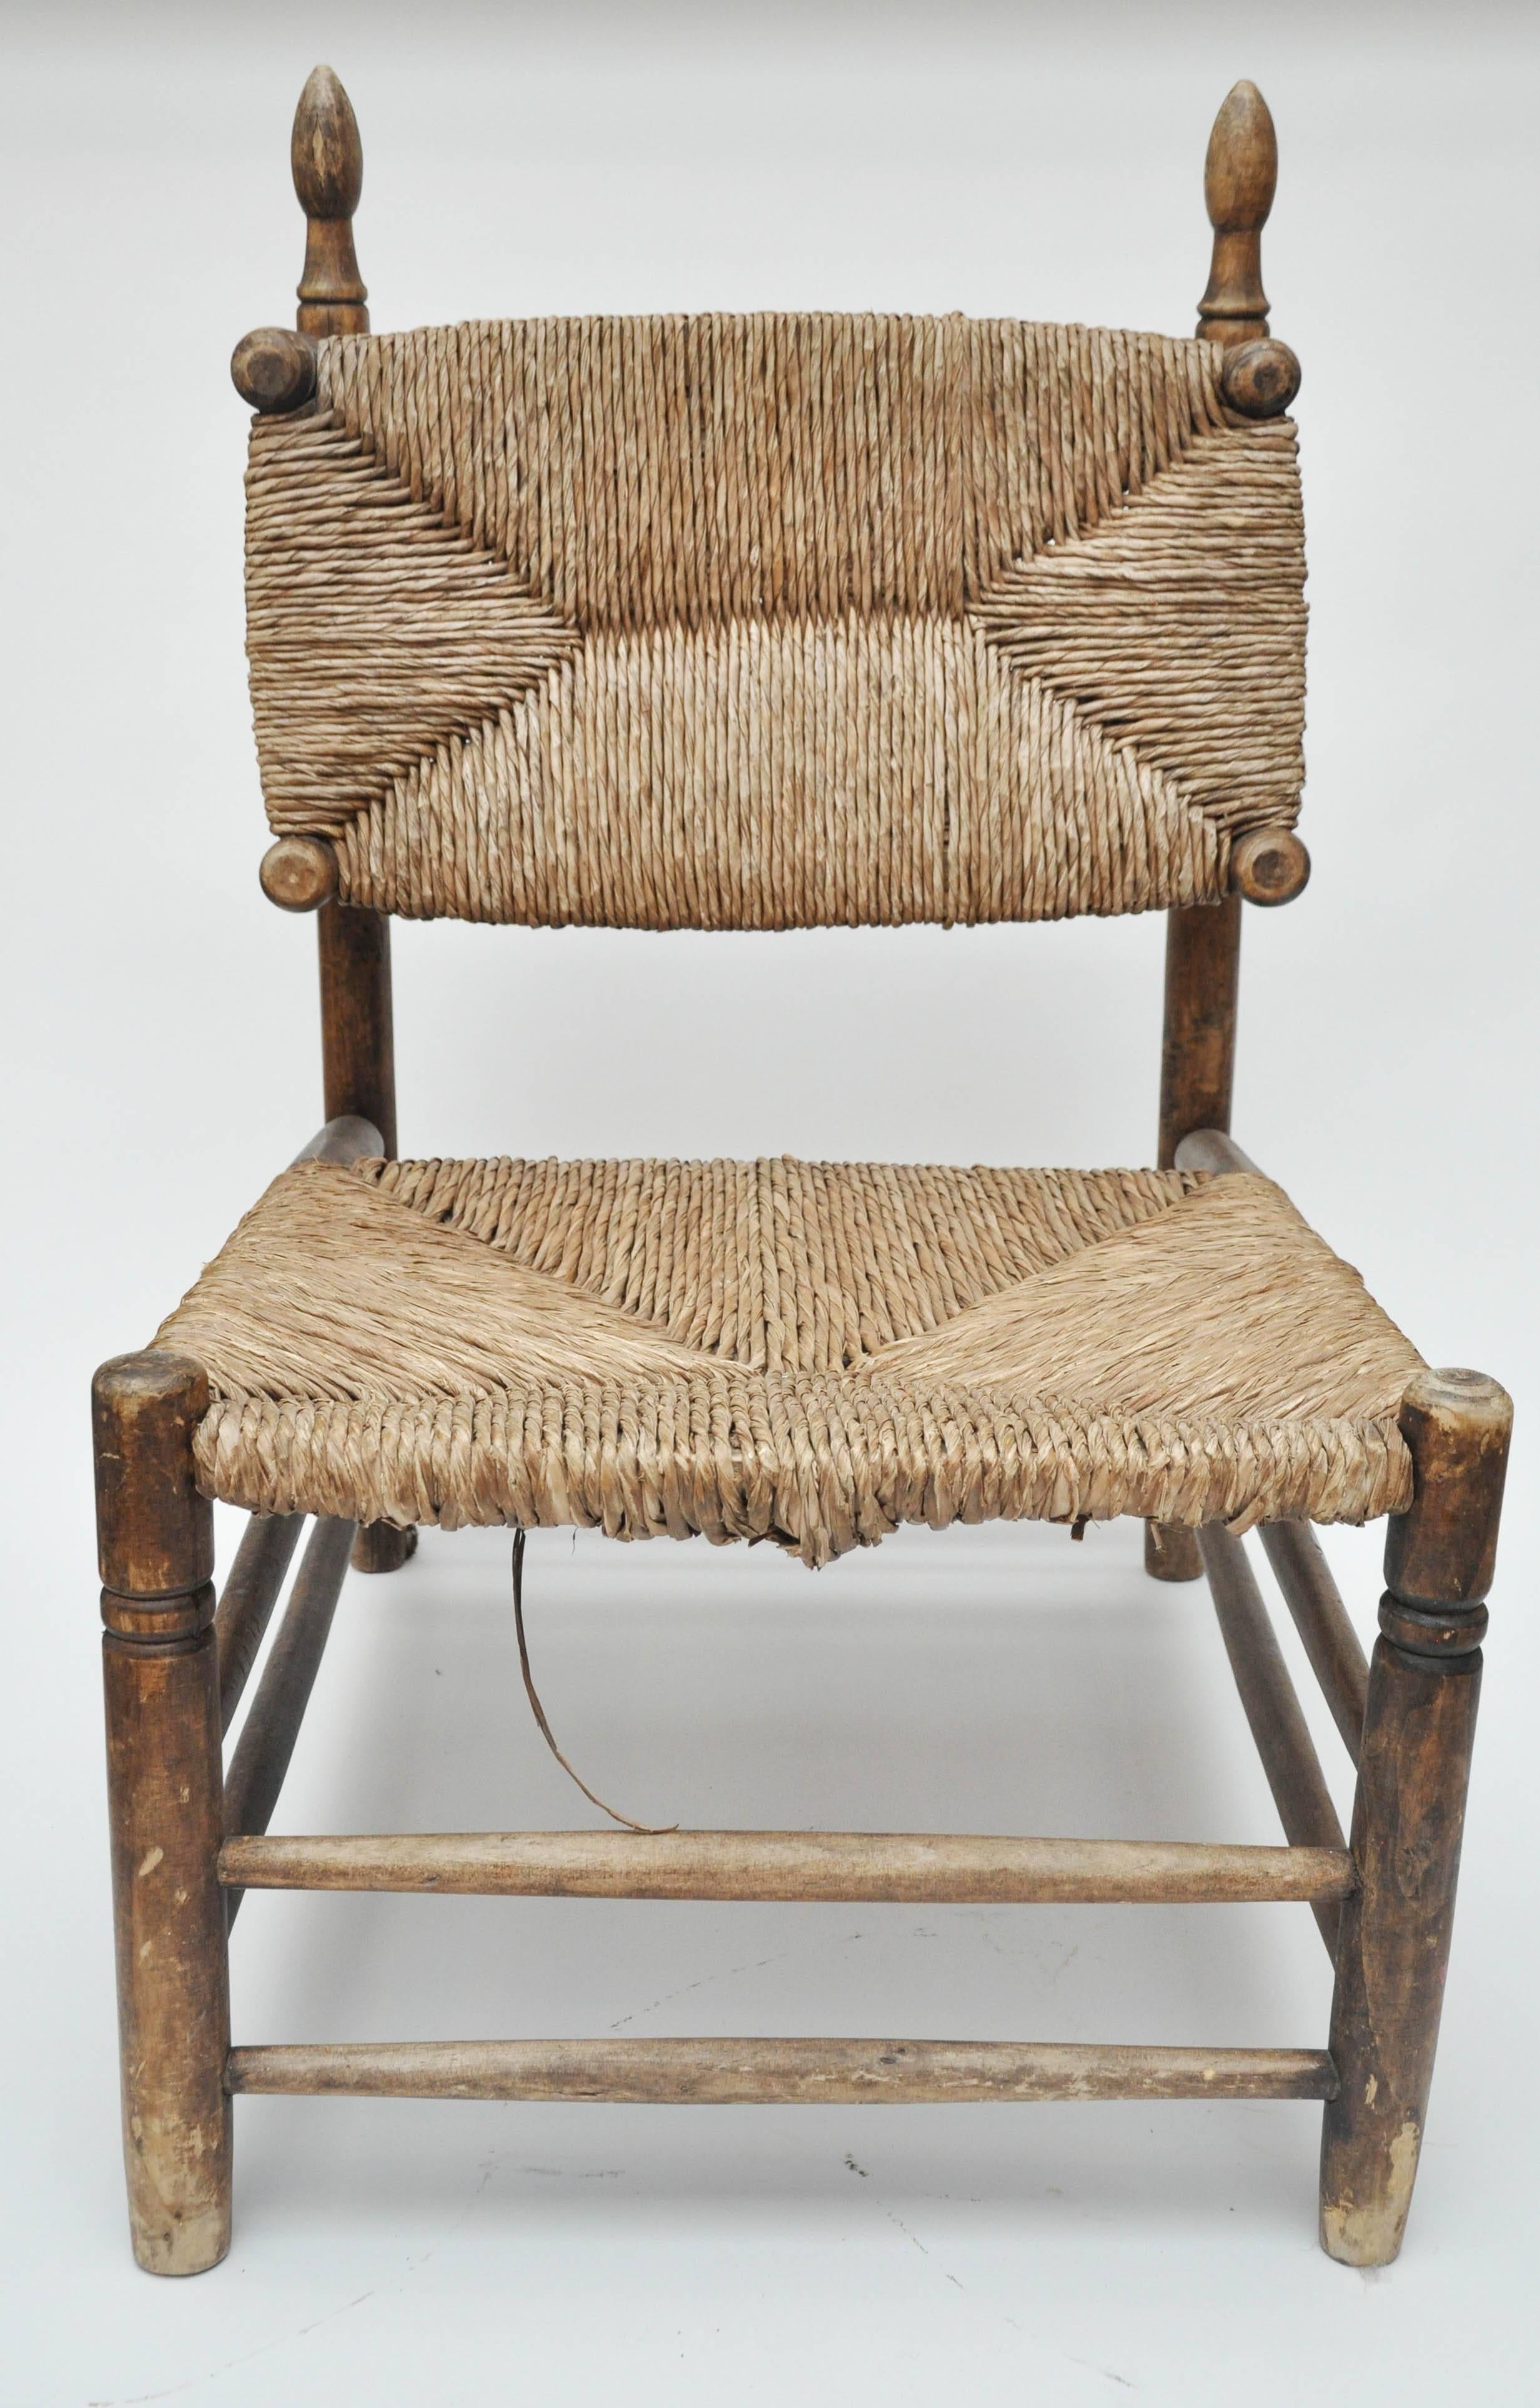 Early 20th century French rush slipper chairs. Found in France. Beautiful handcrafted rush seat and back and turned leg details. 
Unique shape and size. Would be great at the foot of a king-size bed

Dimensions: 21.5" W x 21" D x